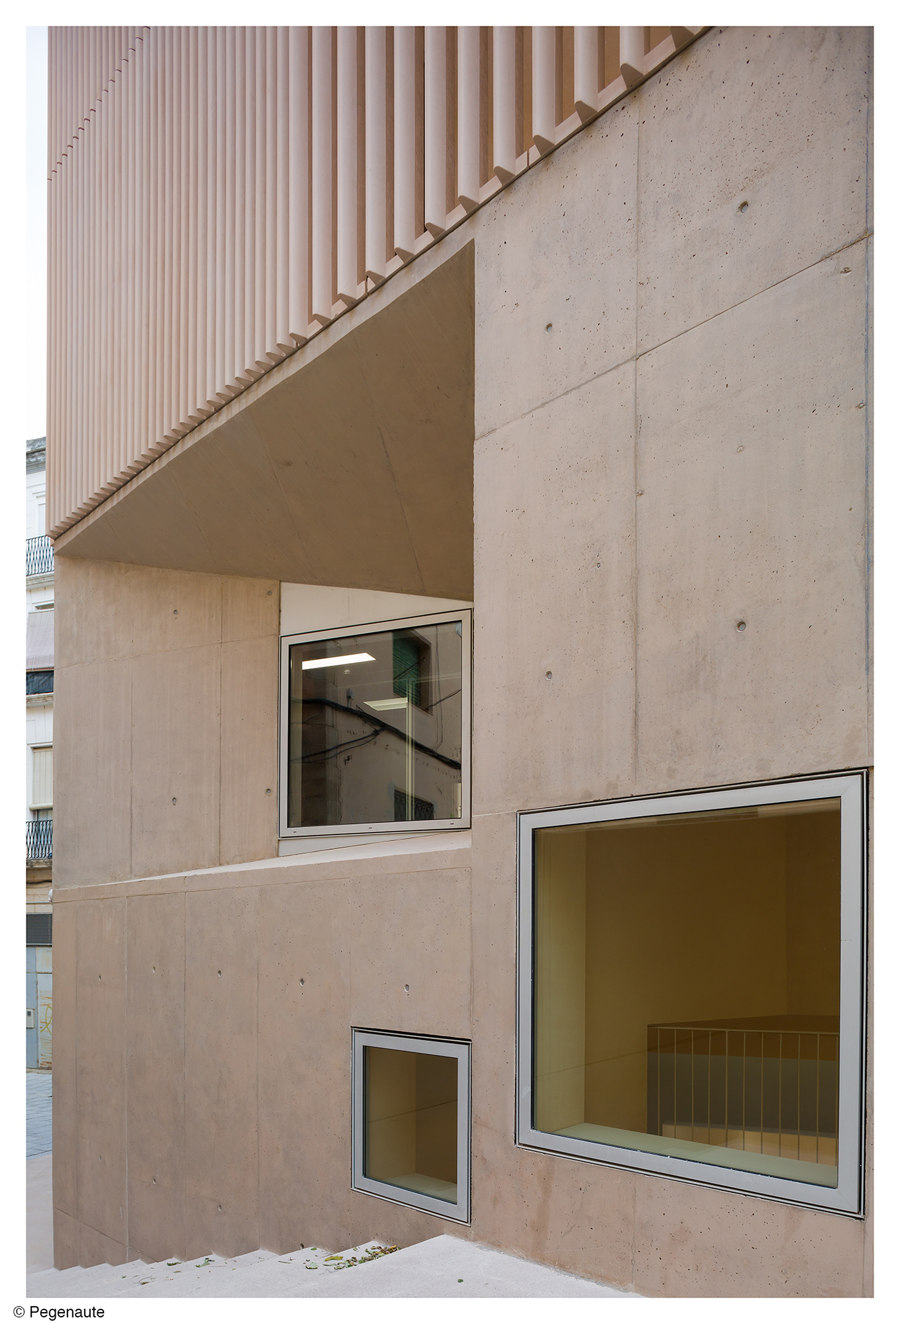 Tortosa Law Courts by Camps Felip Arquitecturia | Administration buildings